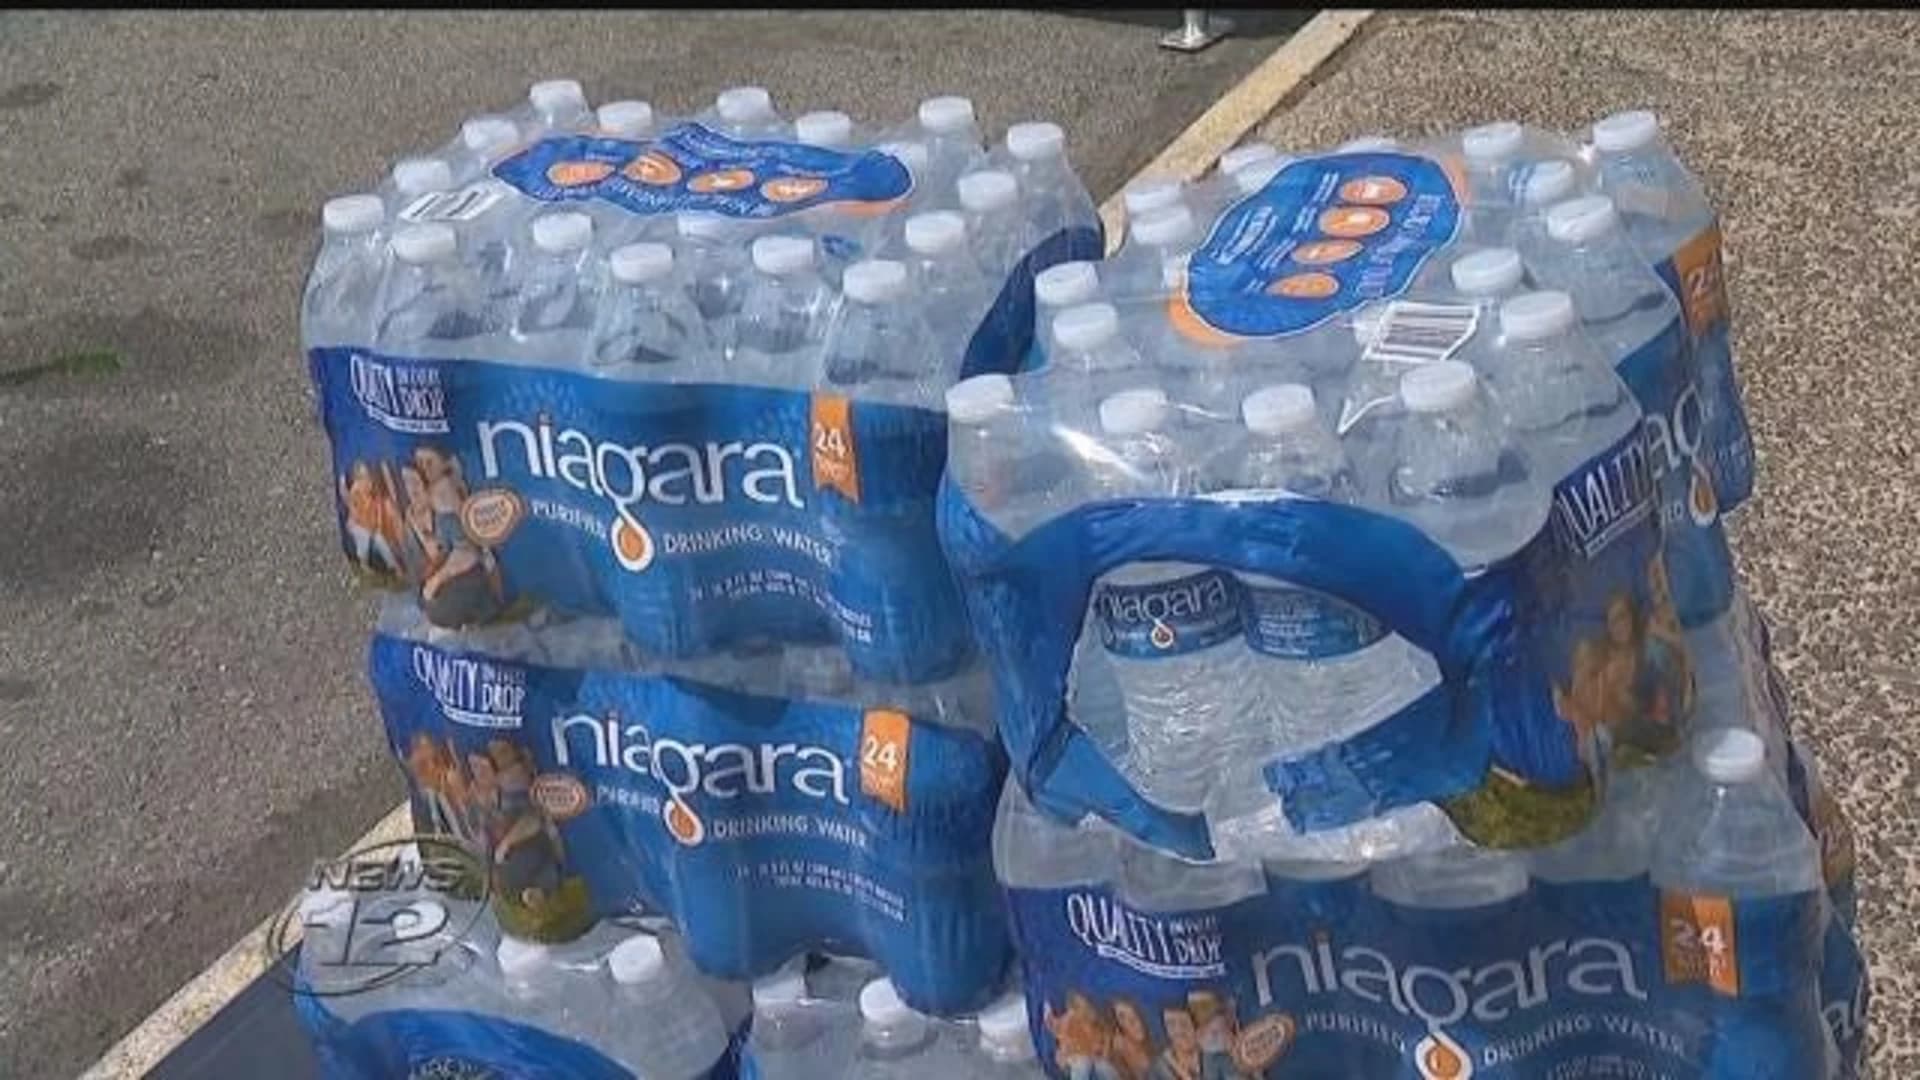 Residents struggle to get safe water from distribution centers in Newark